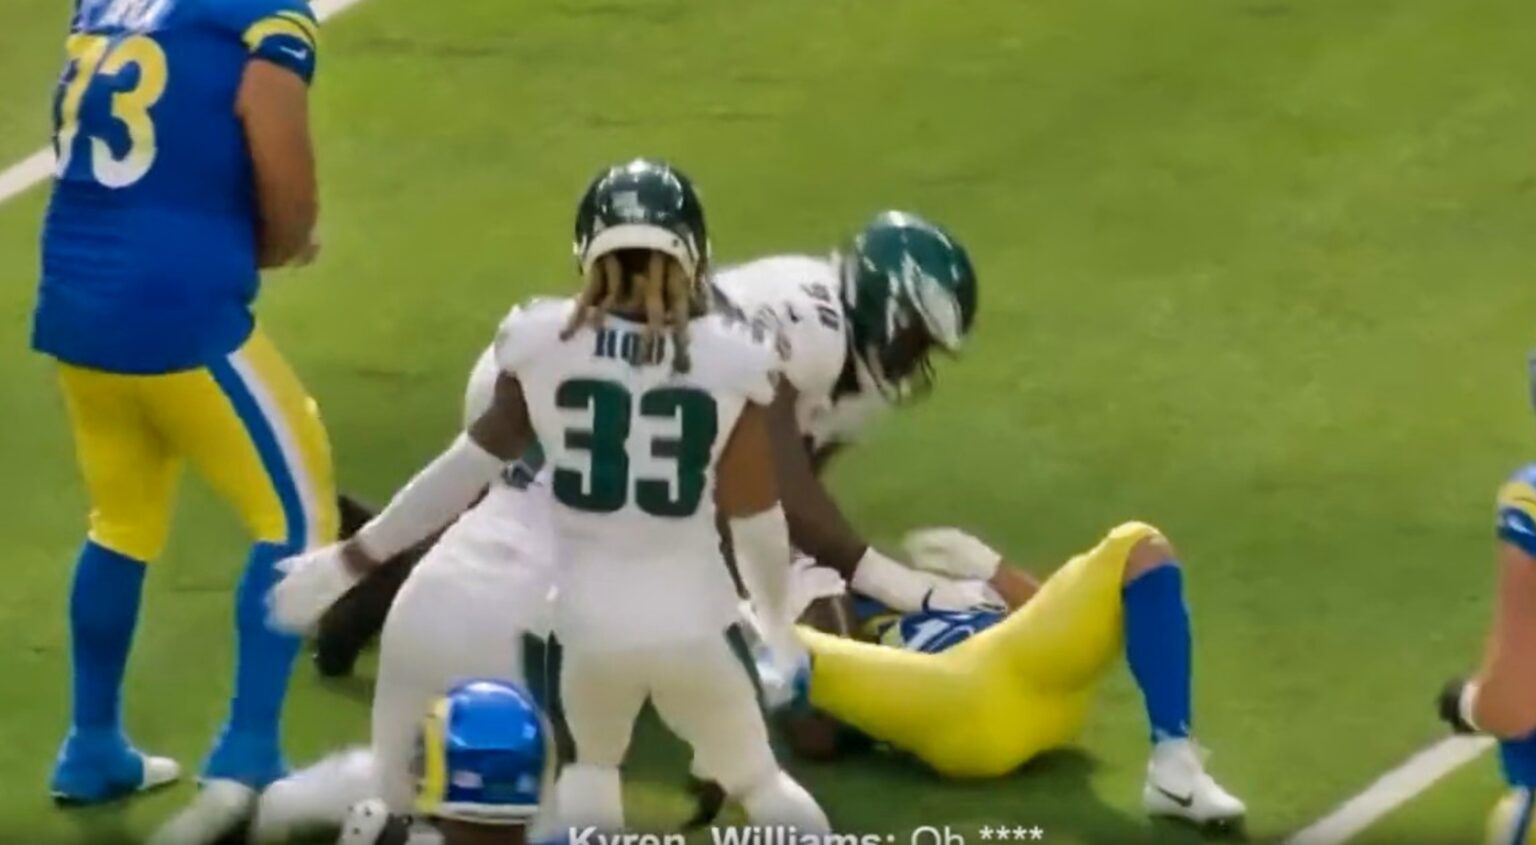 Rams RB Caught On Hot Mic Panicking After being tackled by an Eagles DL, Kyren Williams screamed “OH S” Jordan Davis (VIDEO)